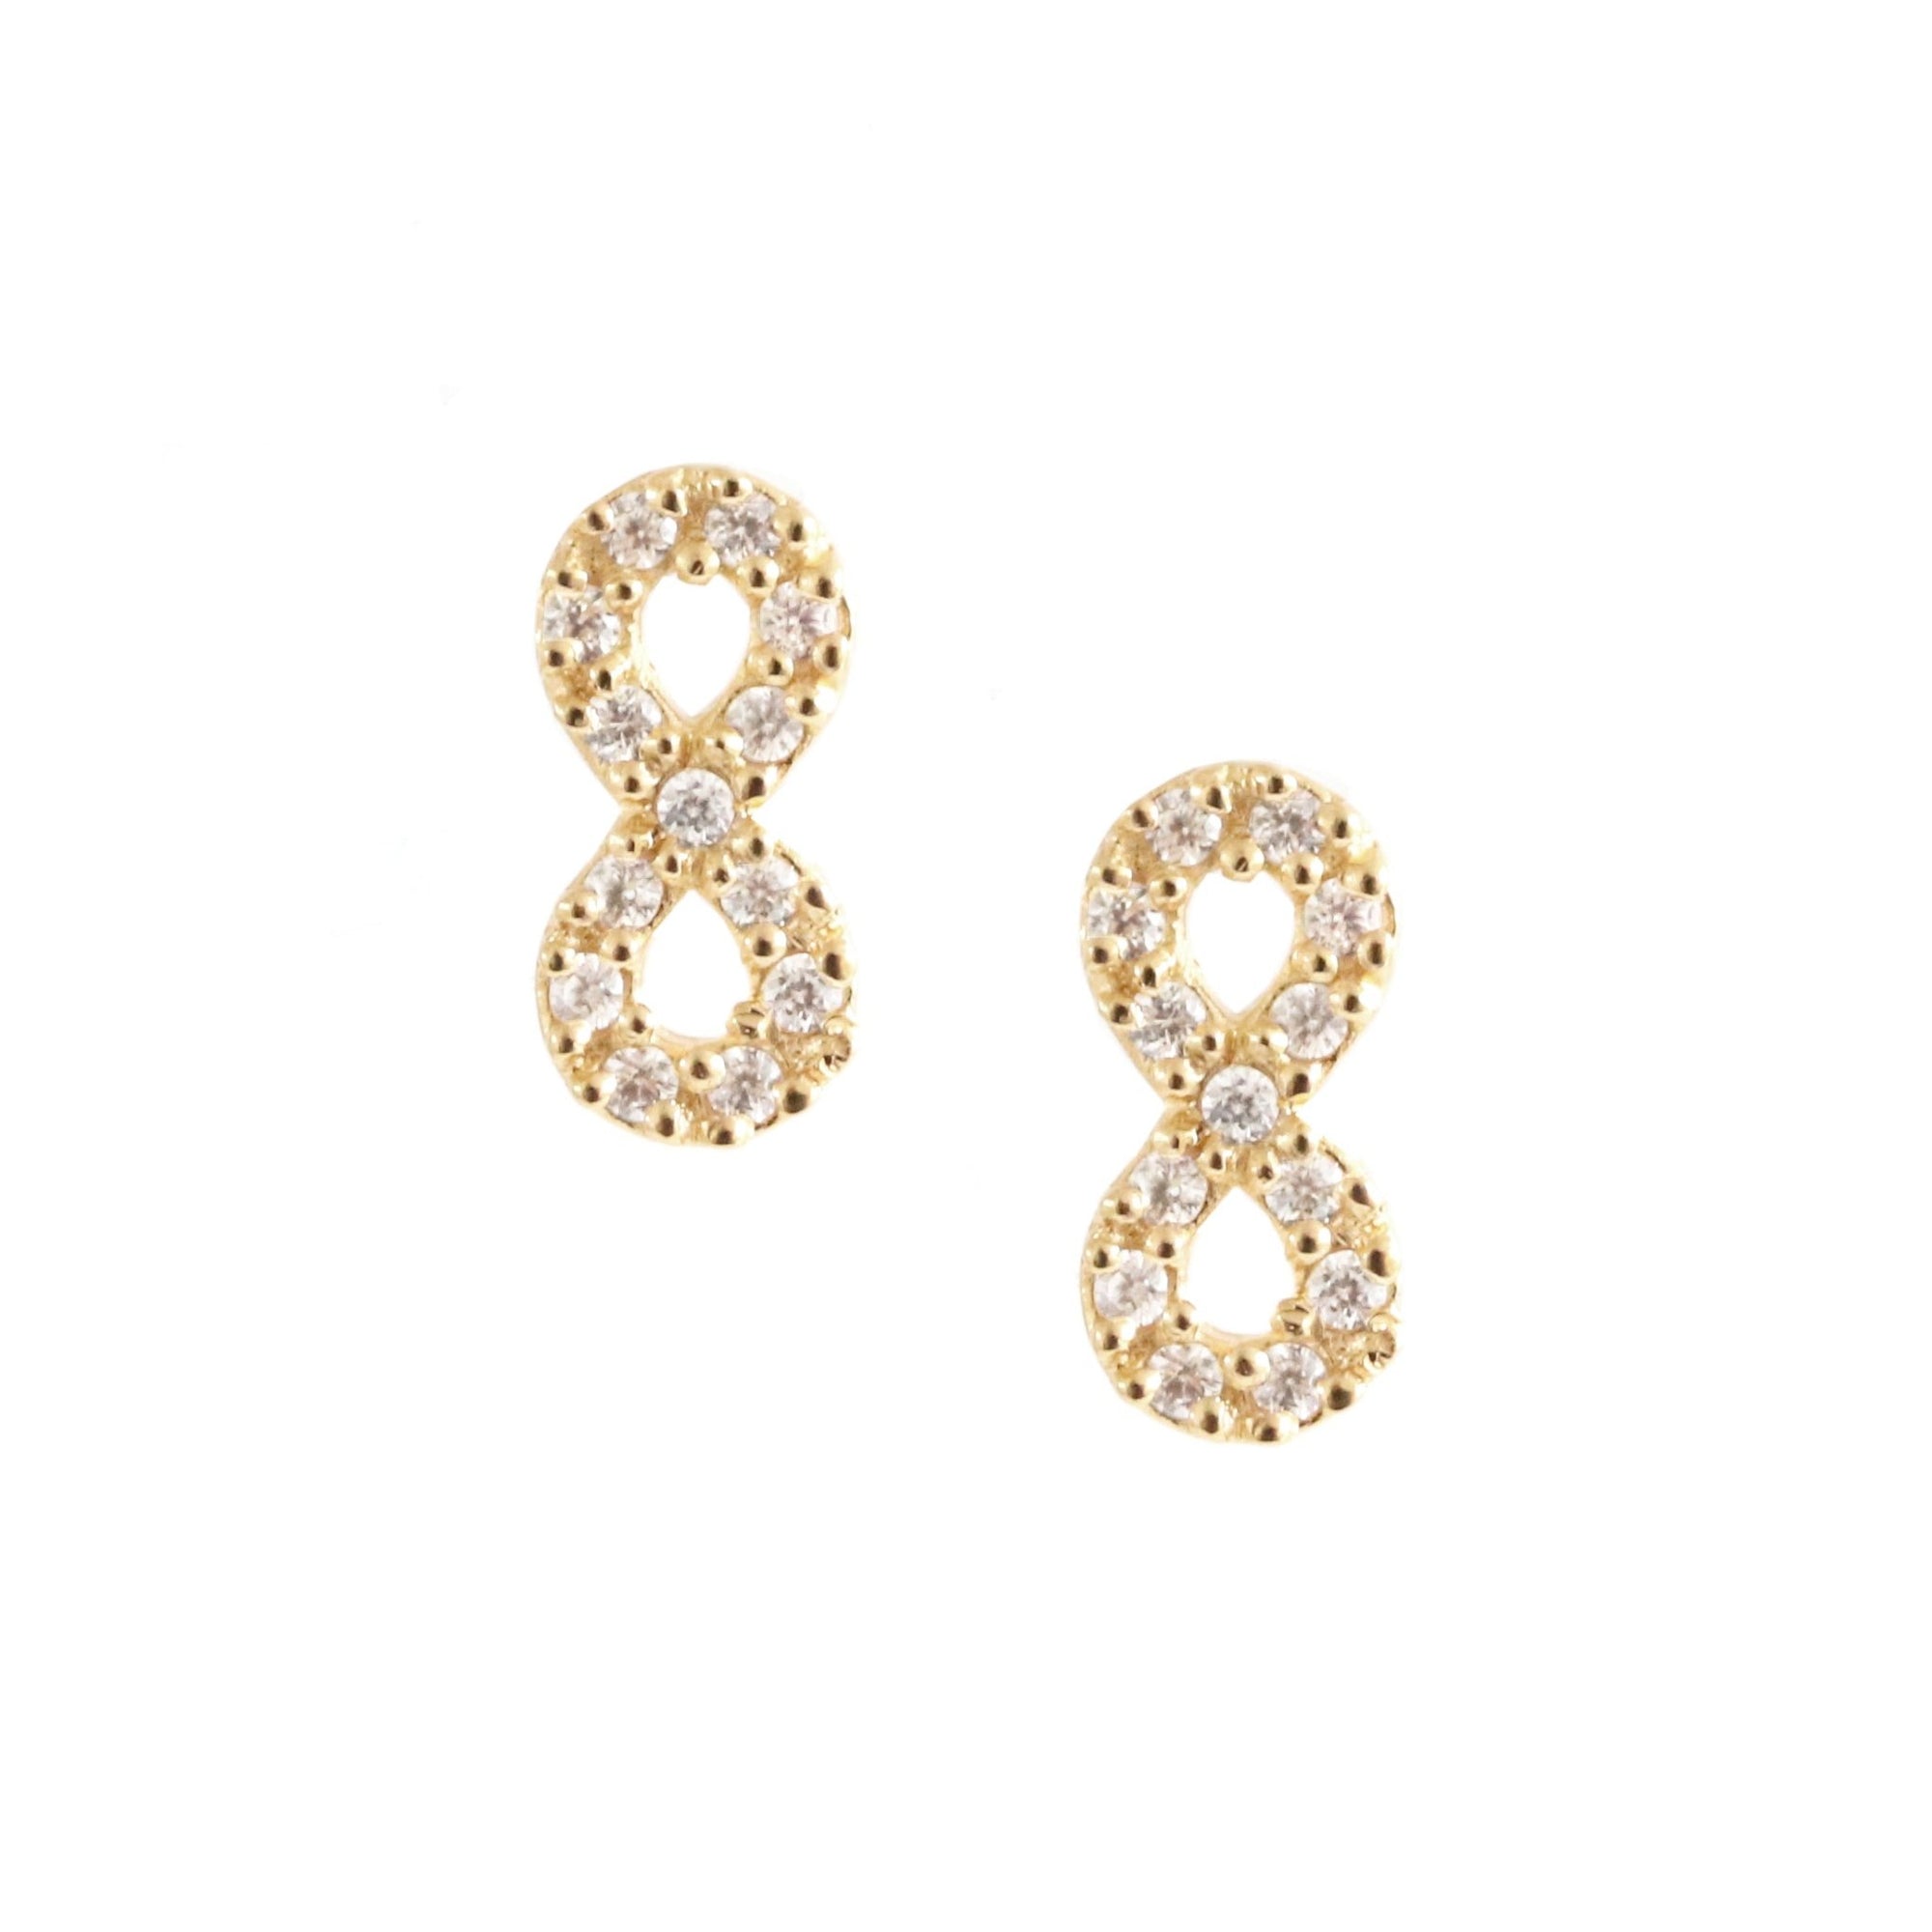 LOVE INFINITY STUDS - CUBIC ZIRCONIA & GOLD - SO PRETTY CARA COTTER